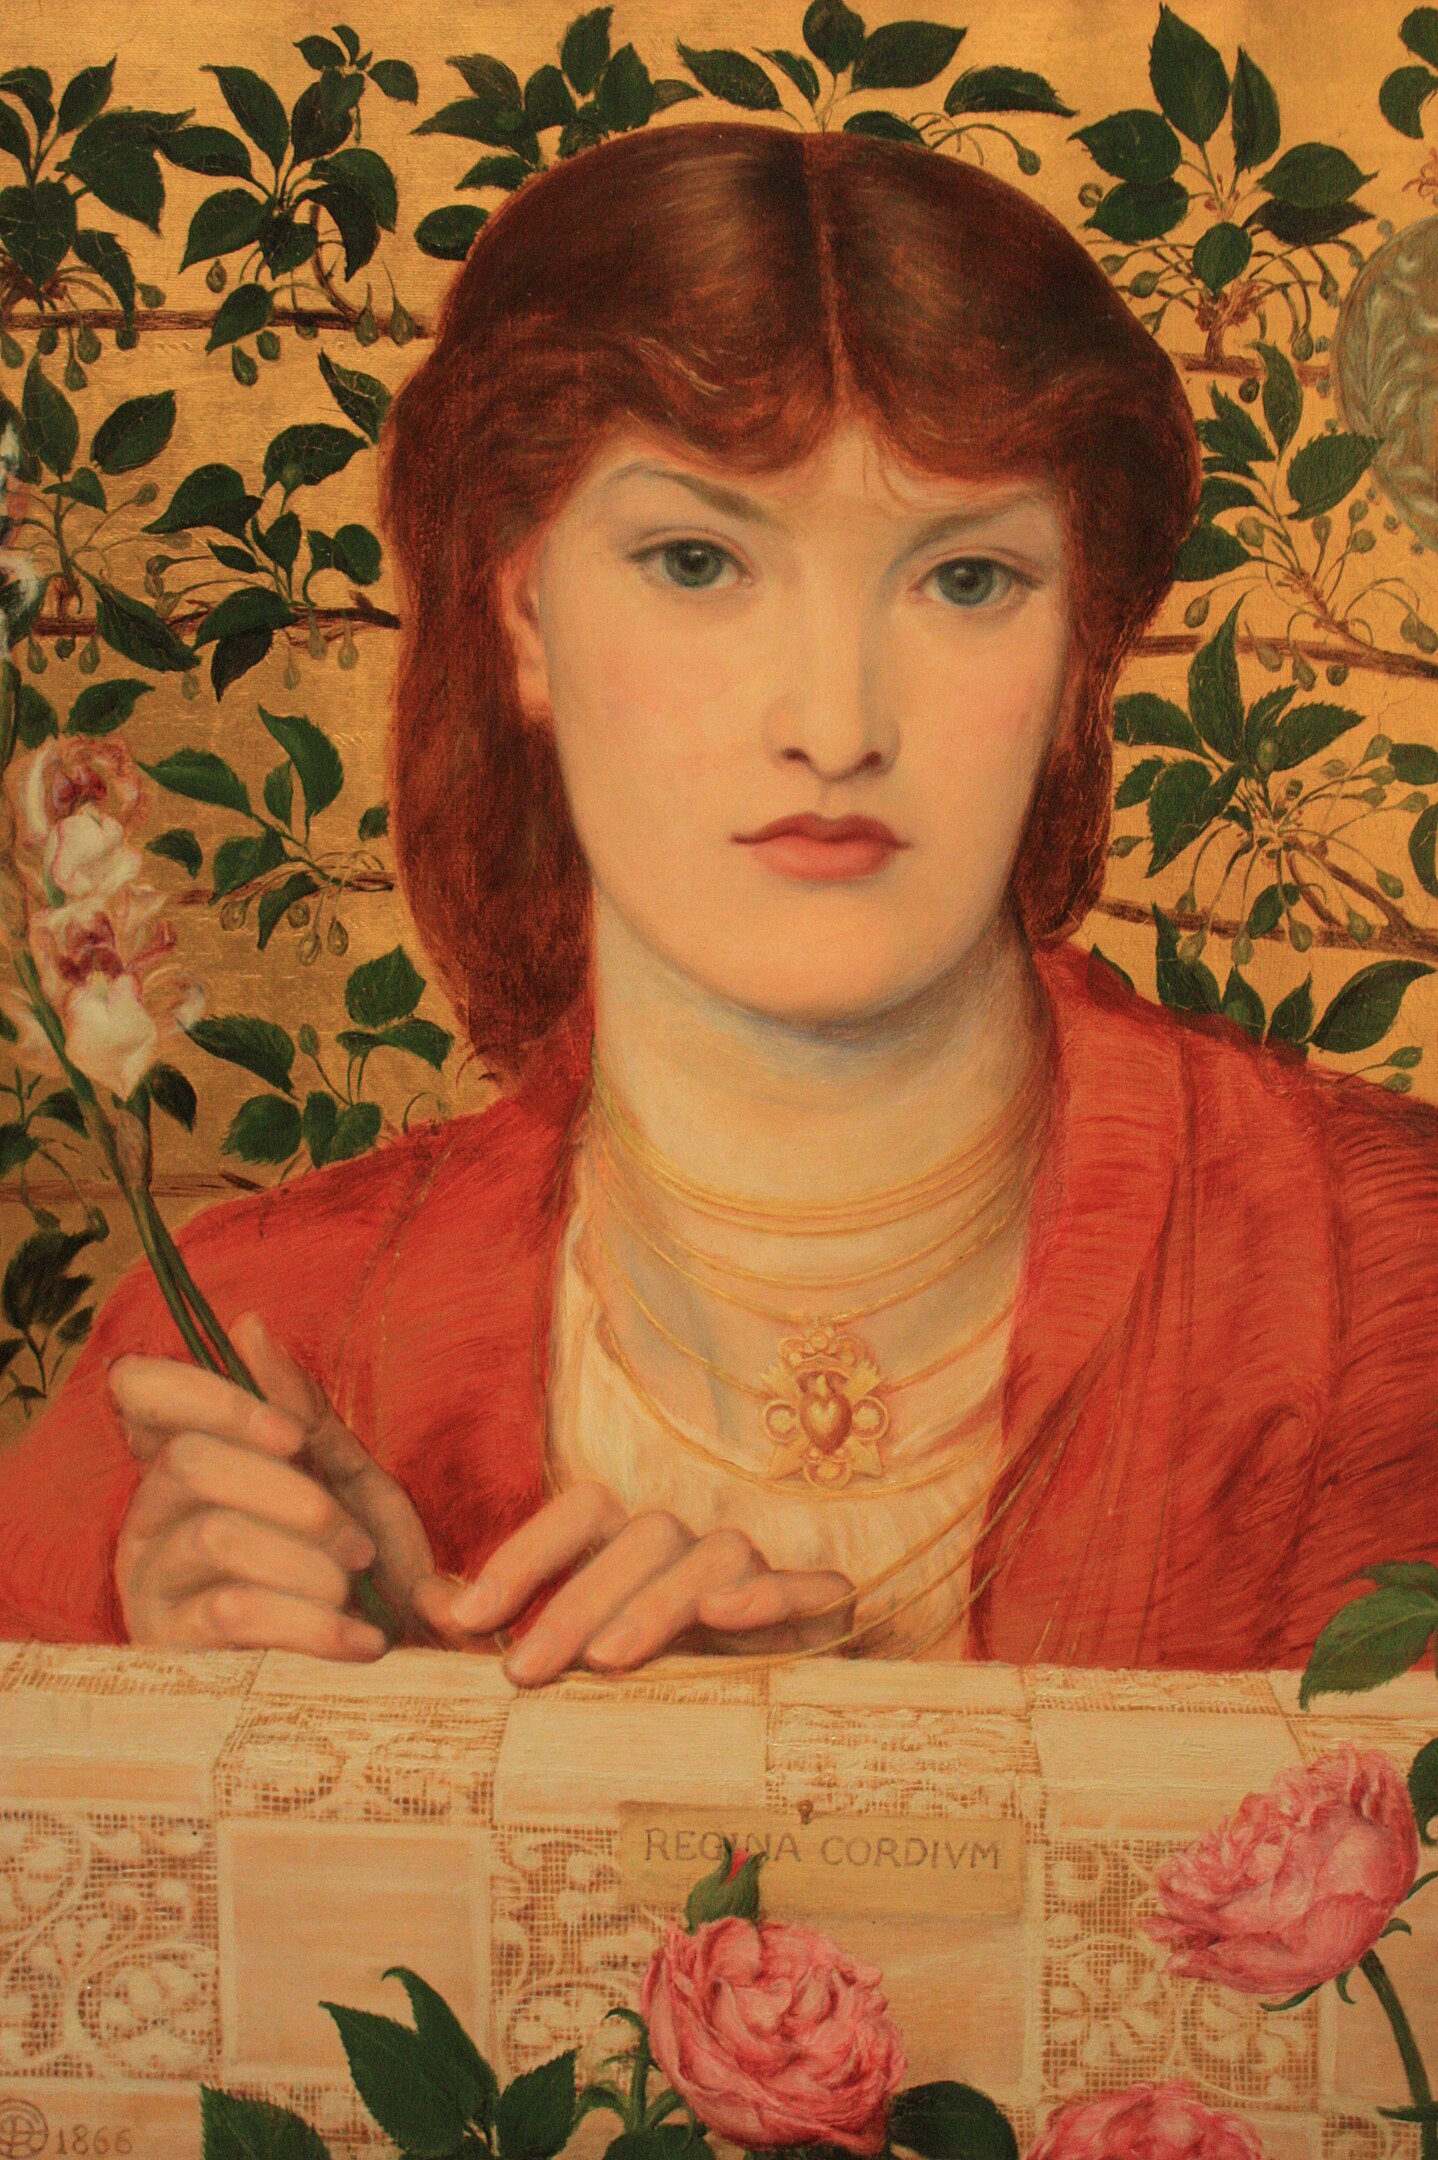 A portrait of a woman with a floral background behind her.